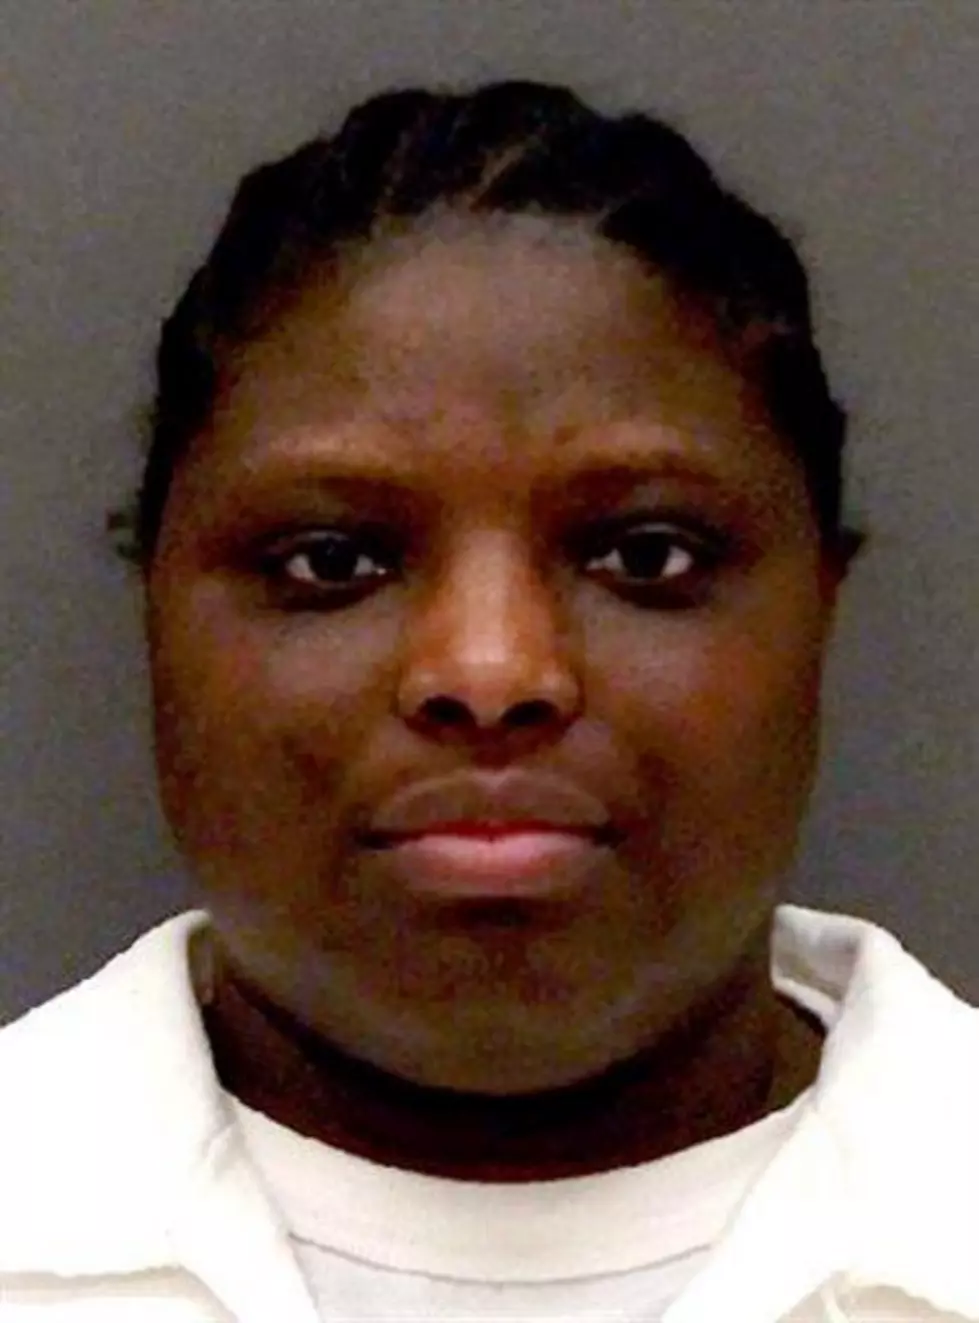 Texas executes woman for starvation of 9-year-old boy